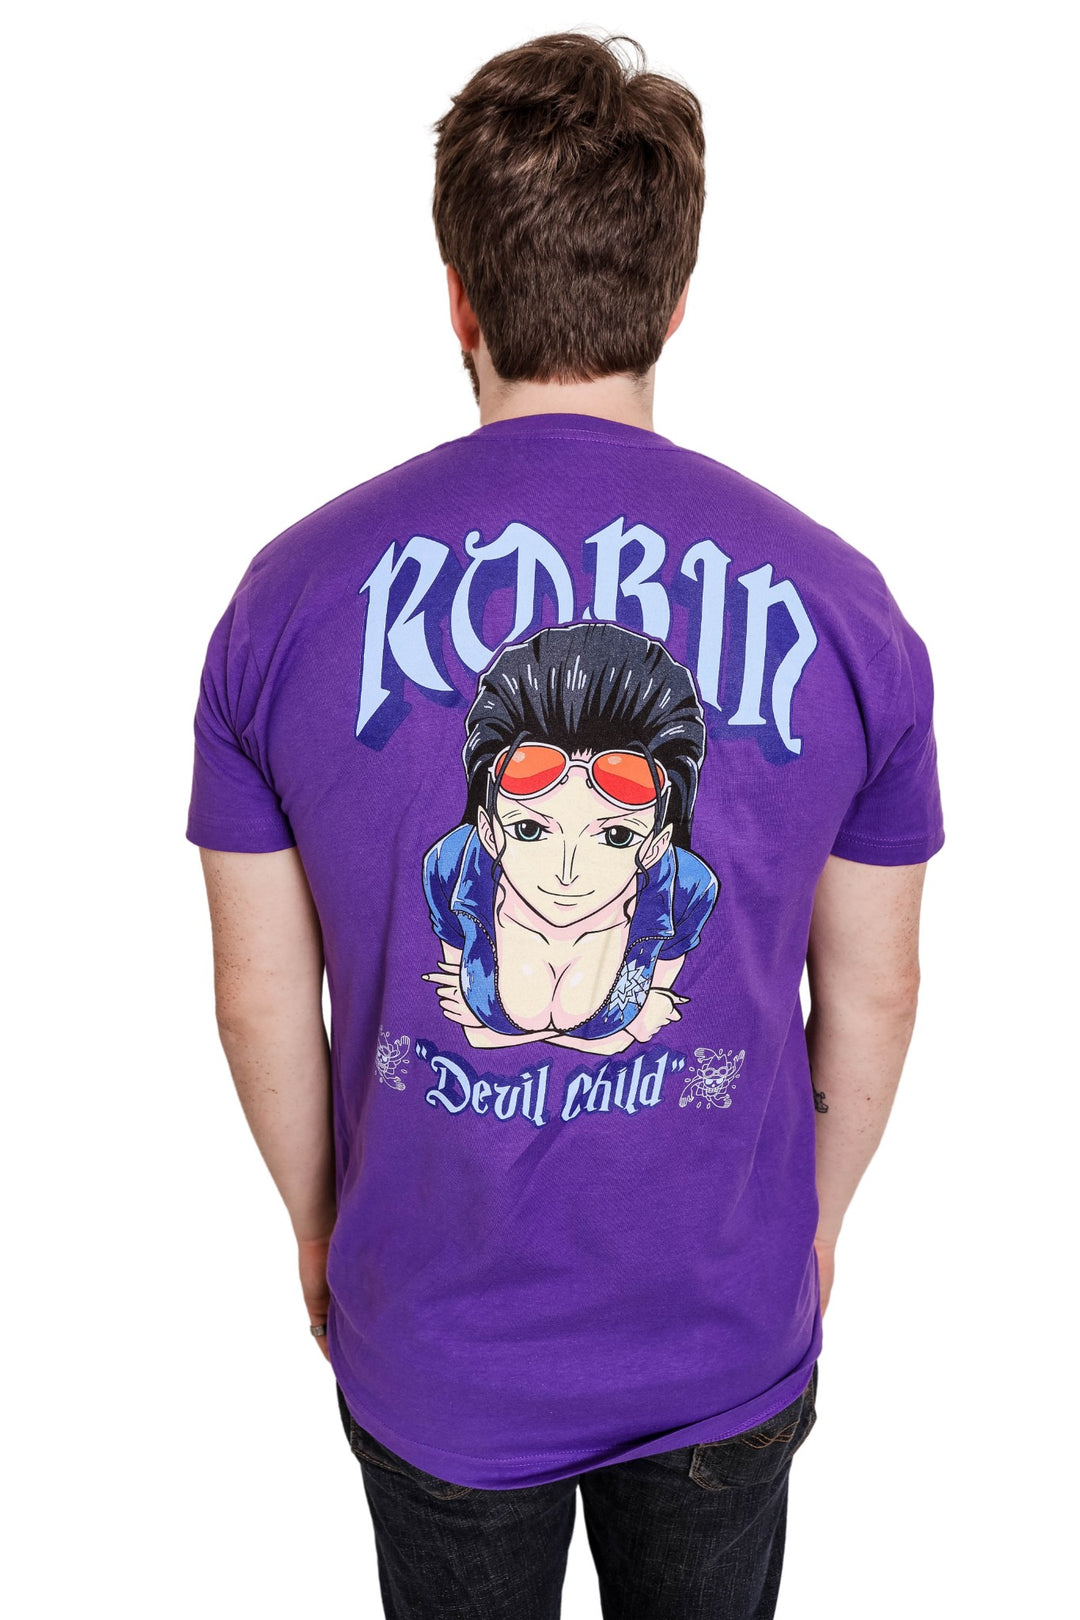 One Piece Robin Devil Child With Back Print Officially Licensed Adult T-Shirt